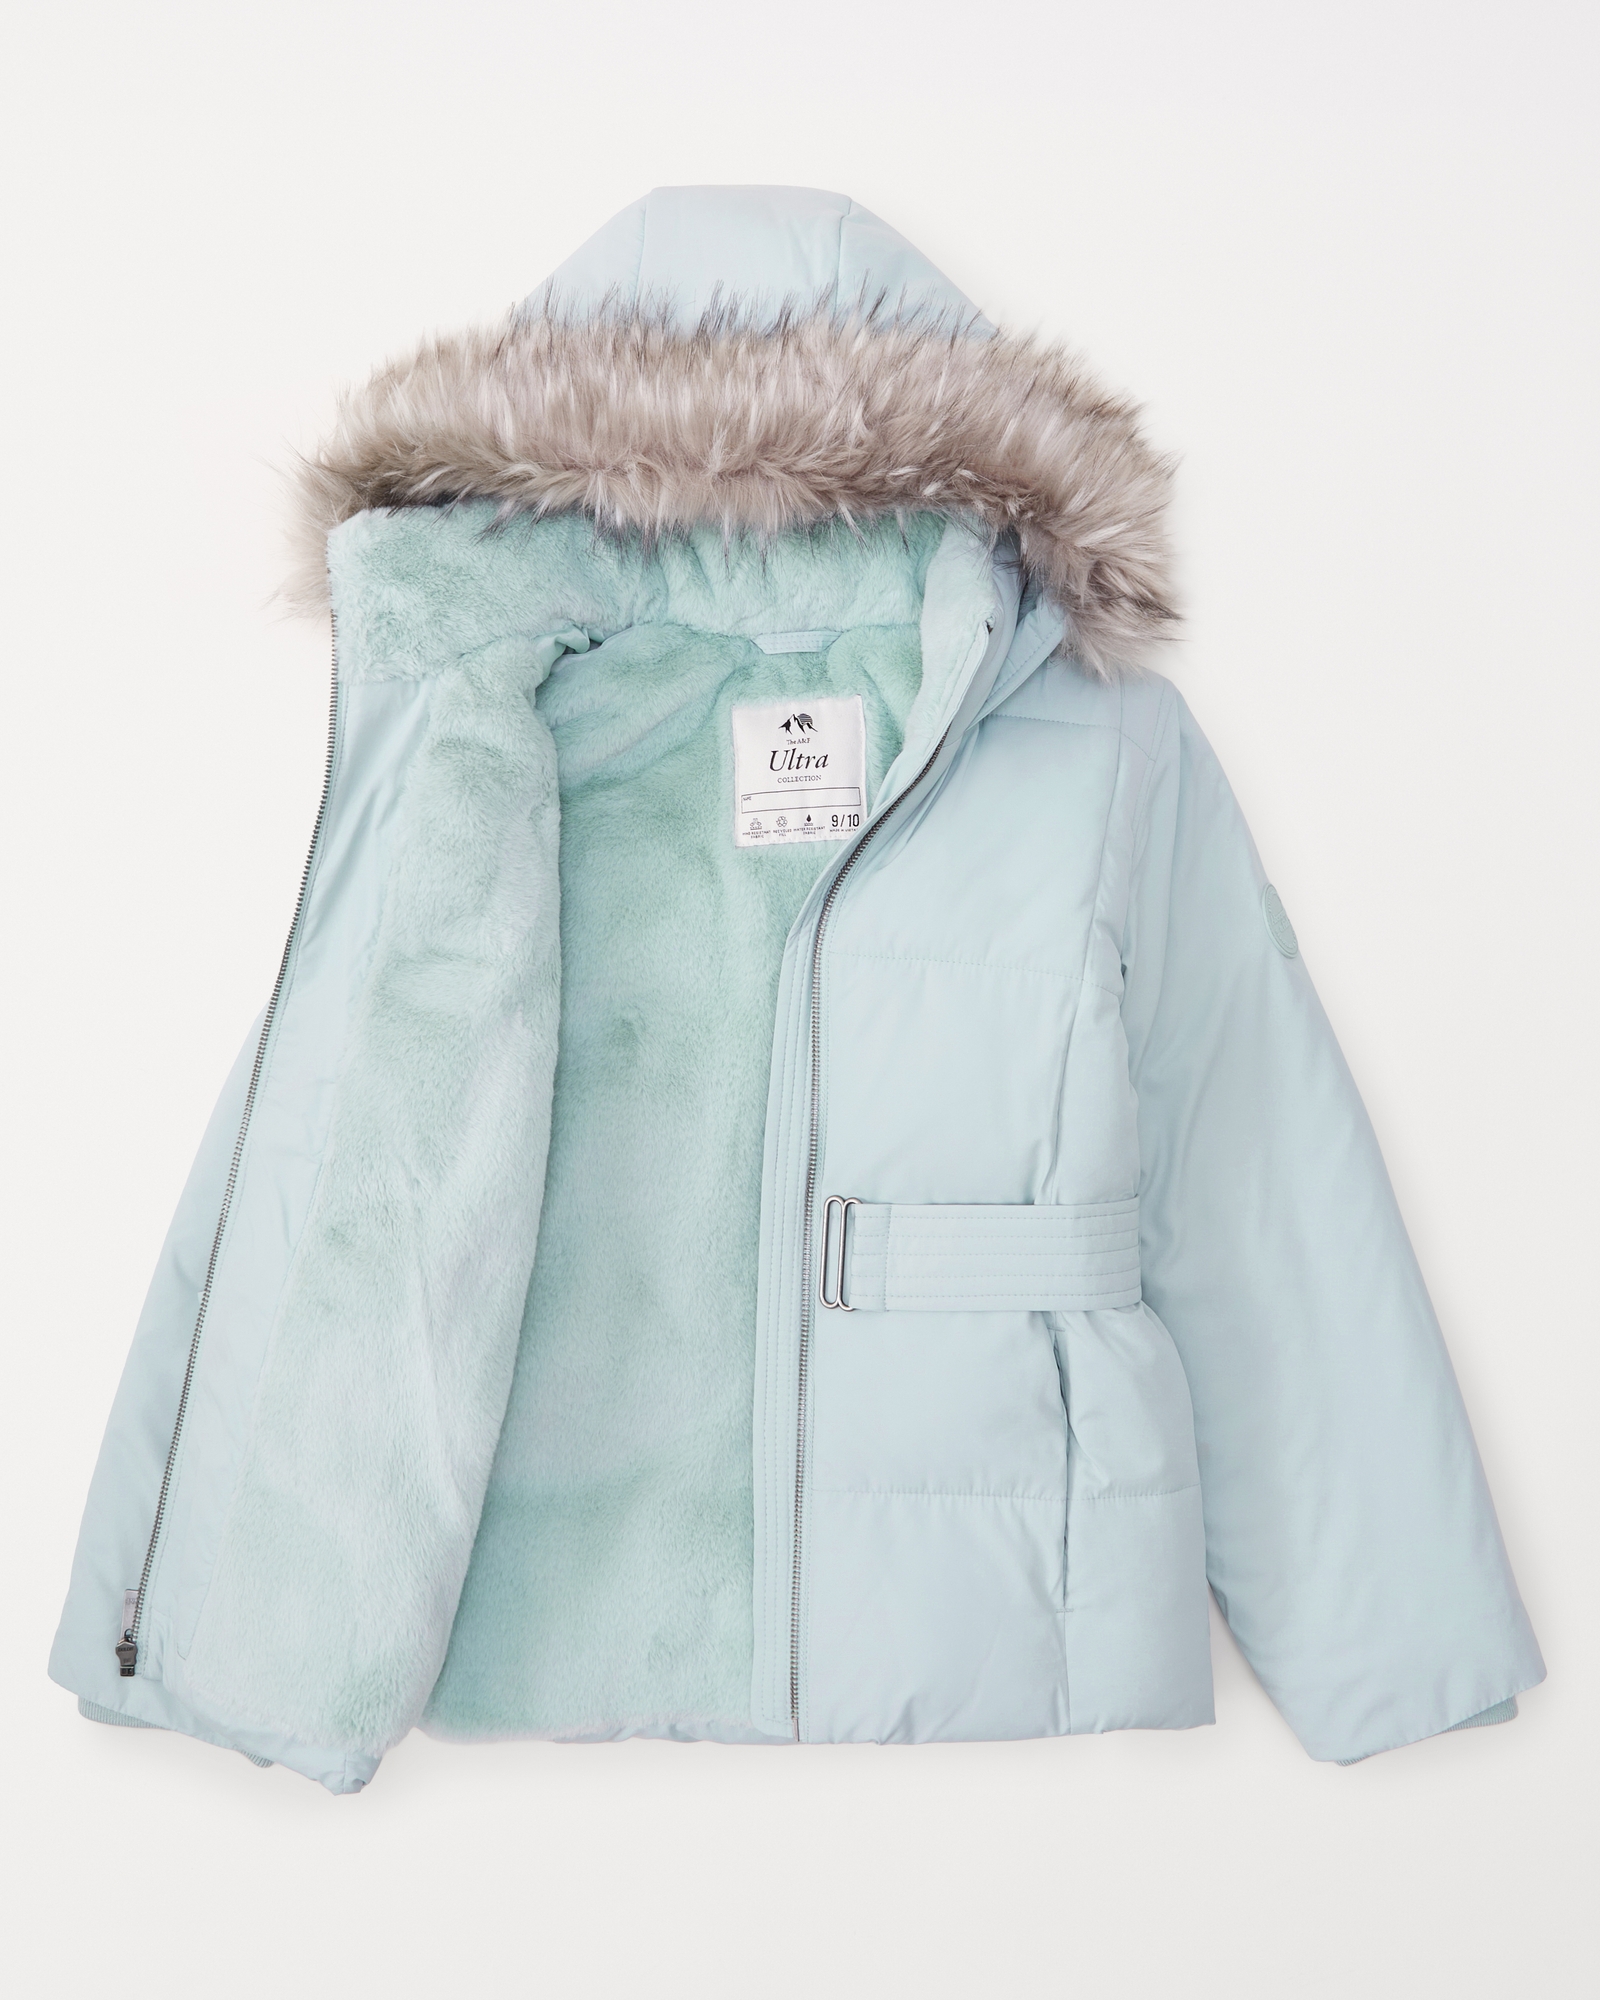 girls a&f ultra belted parka, girls clearance